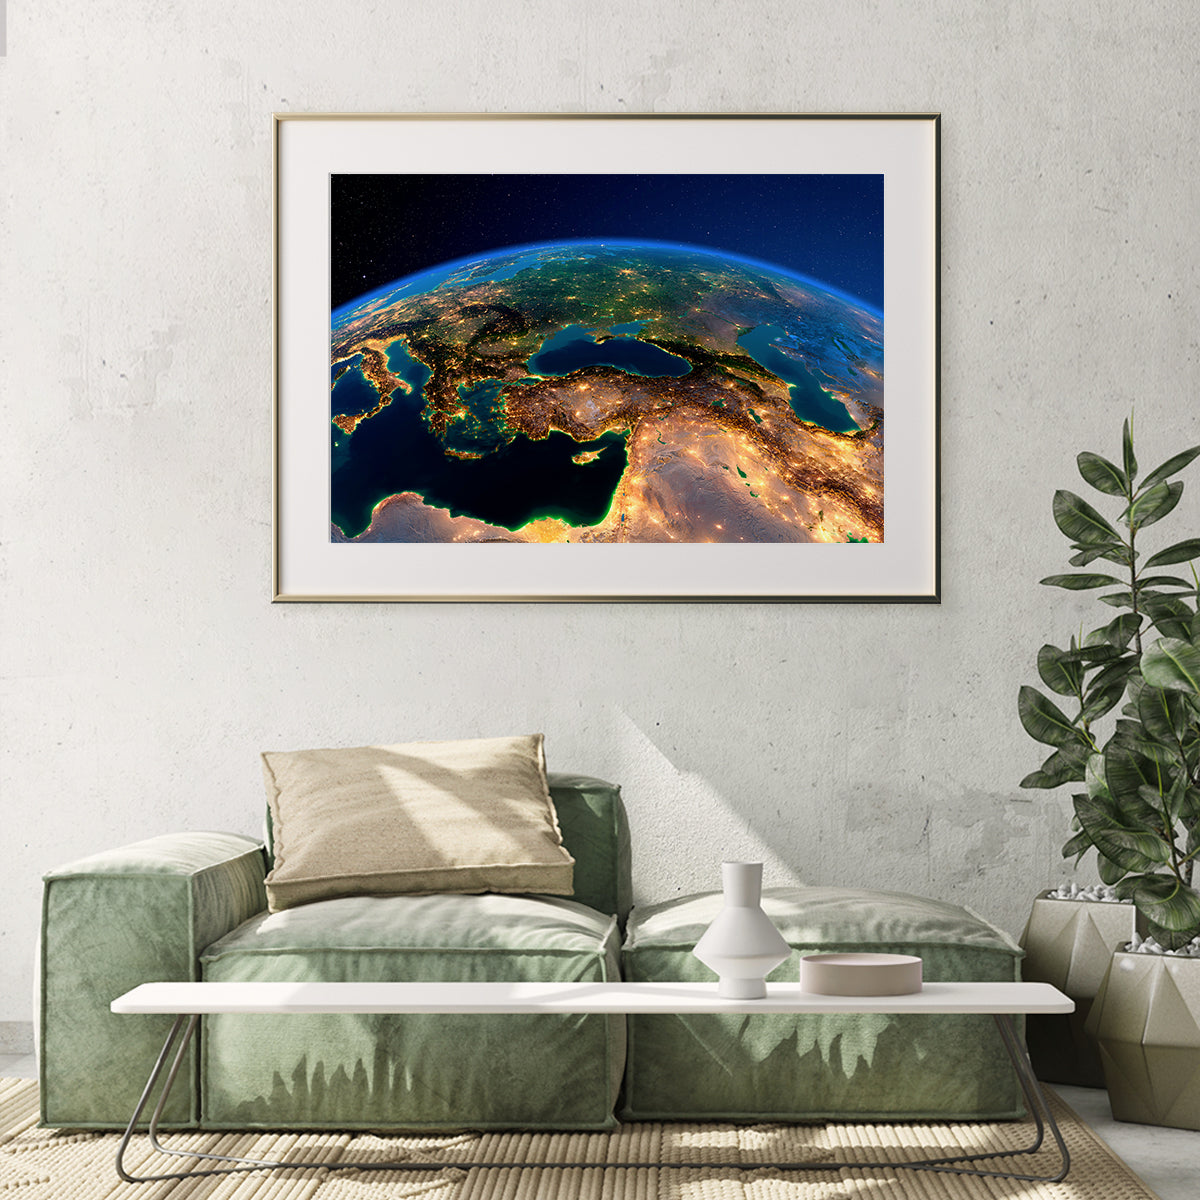 Planet Earth with Night City Lights Poster Design-Horizontal Posters NOT FRAMED-CetArt-10″x8″ inches-CetArt